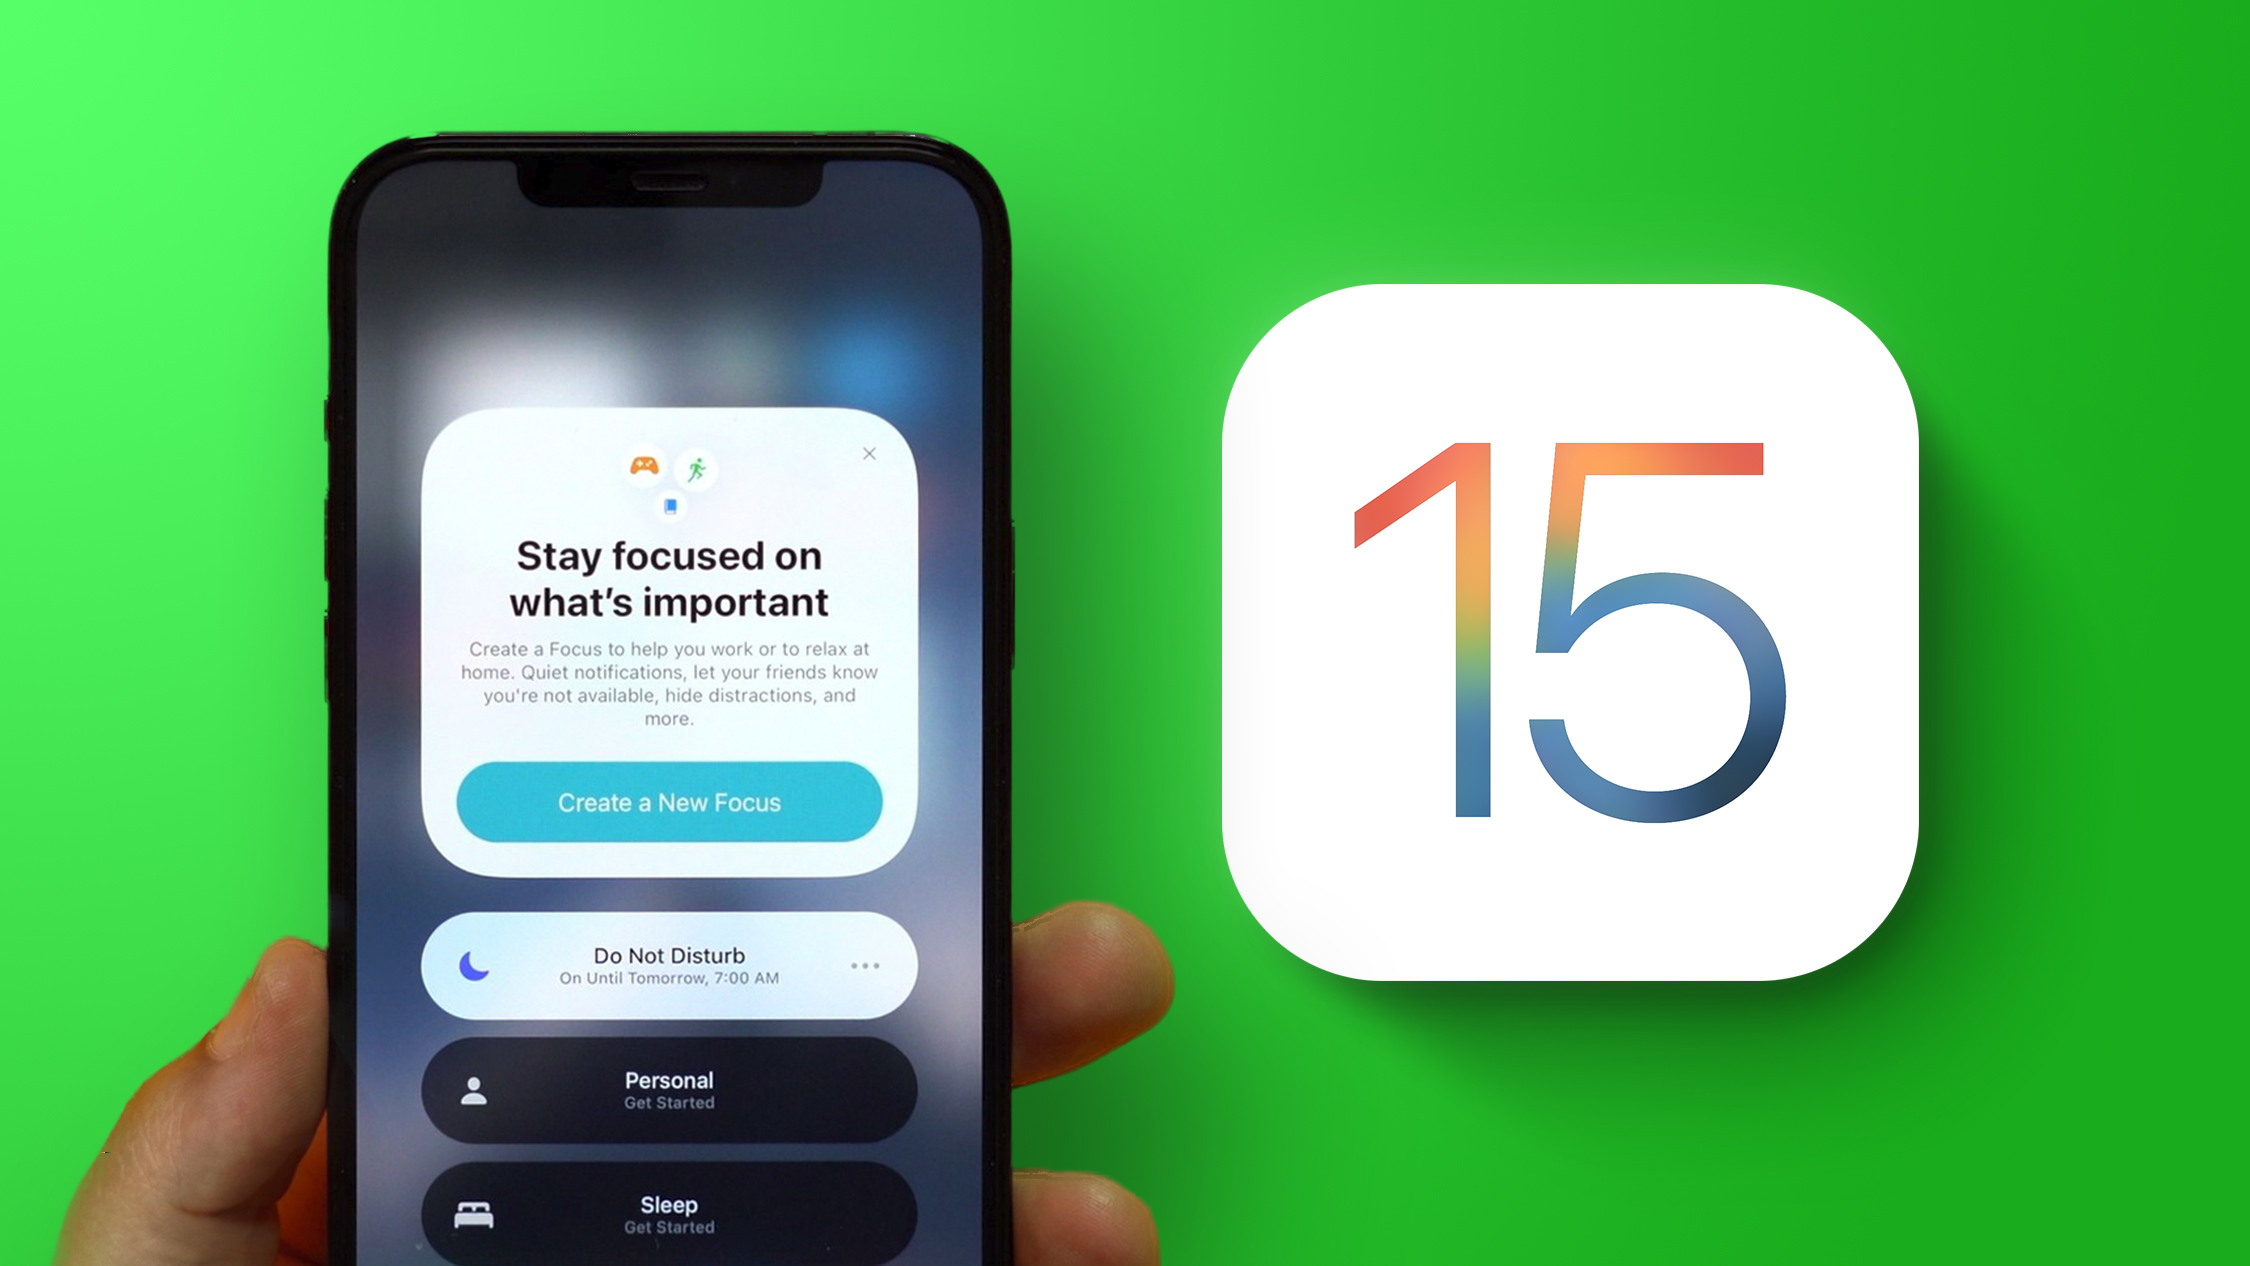 How To Use iOS 15’s New Live Text Feature